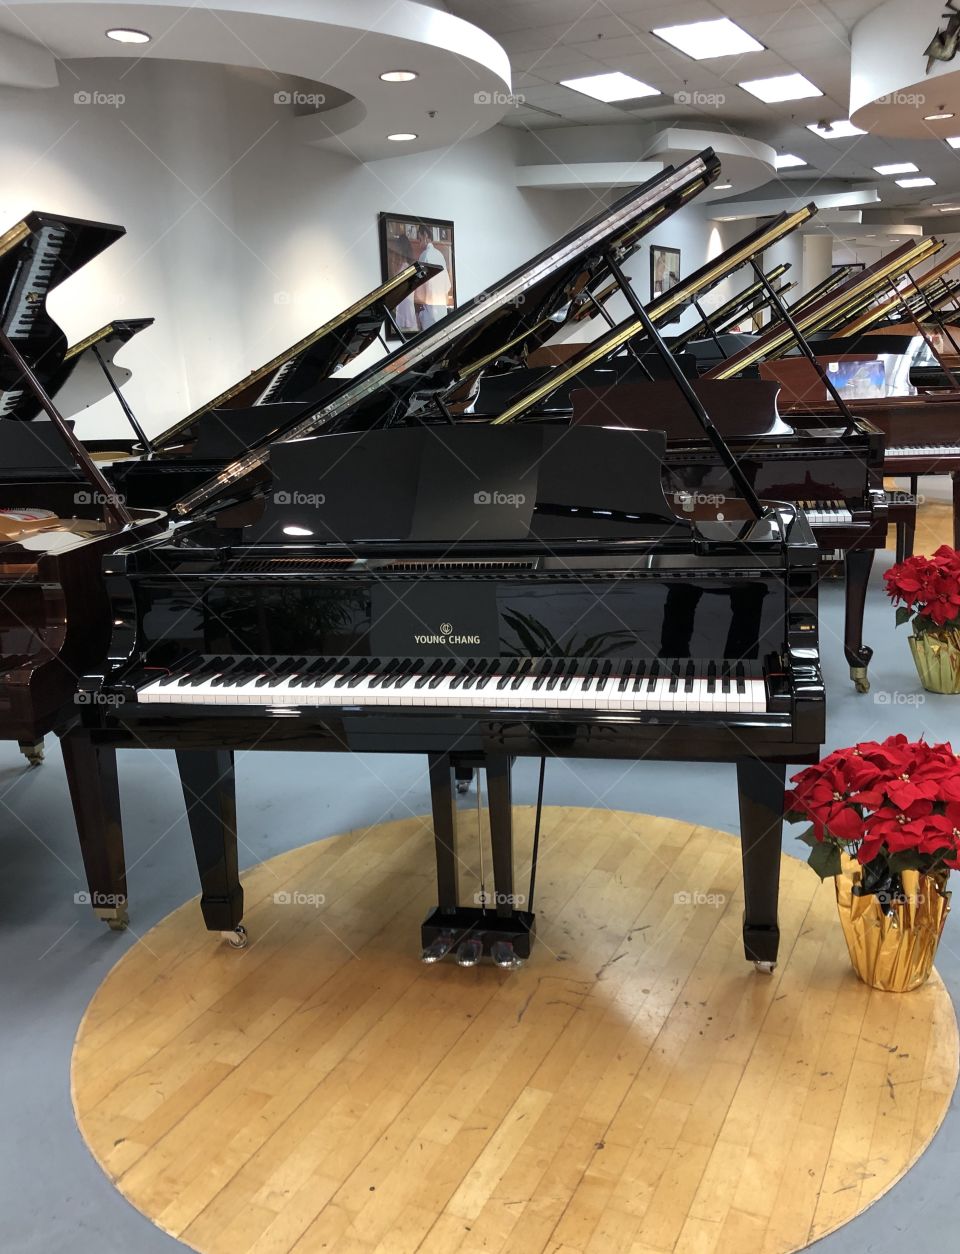 Display of Young Cheng baby grand pianos in retail store with red poinsettia flowers